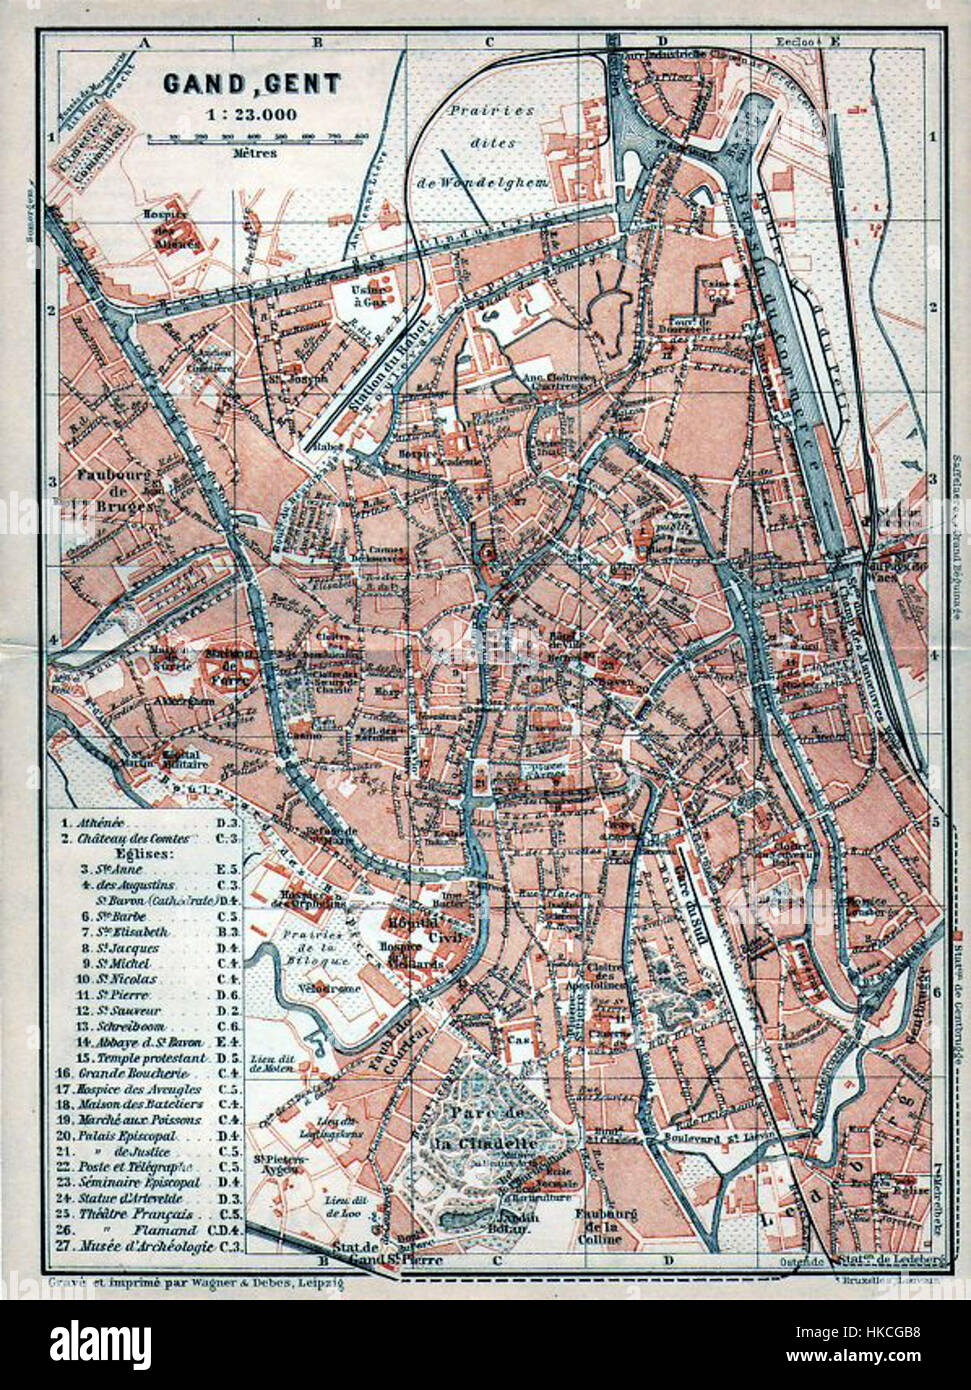 Map of Ghent by Wagner and Debes, 1904 Stock Photo